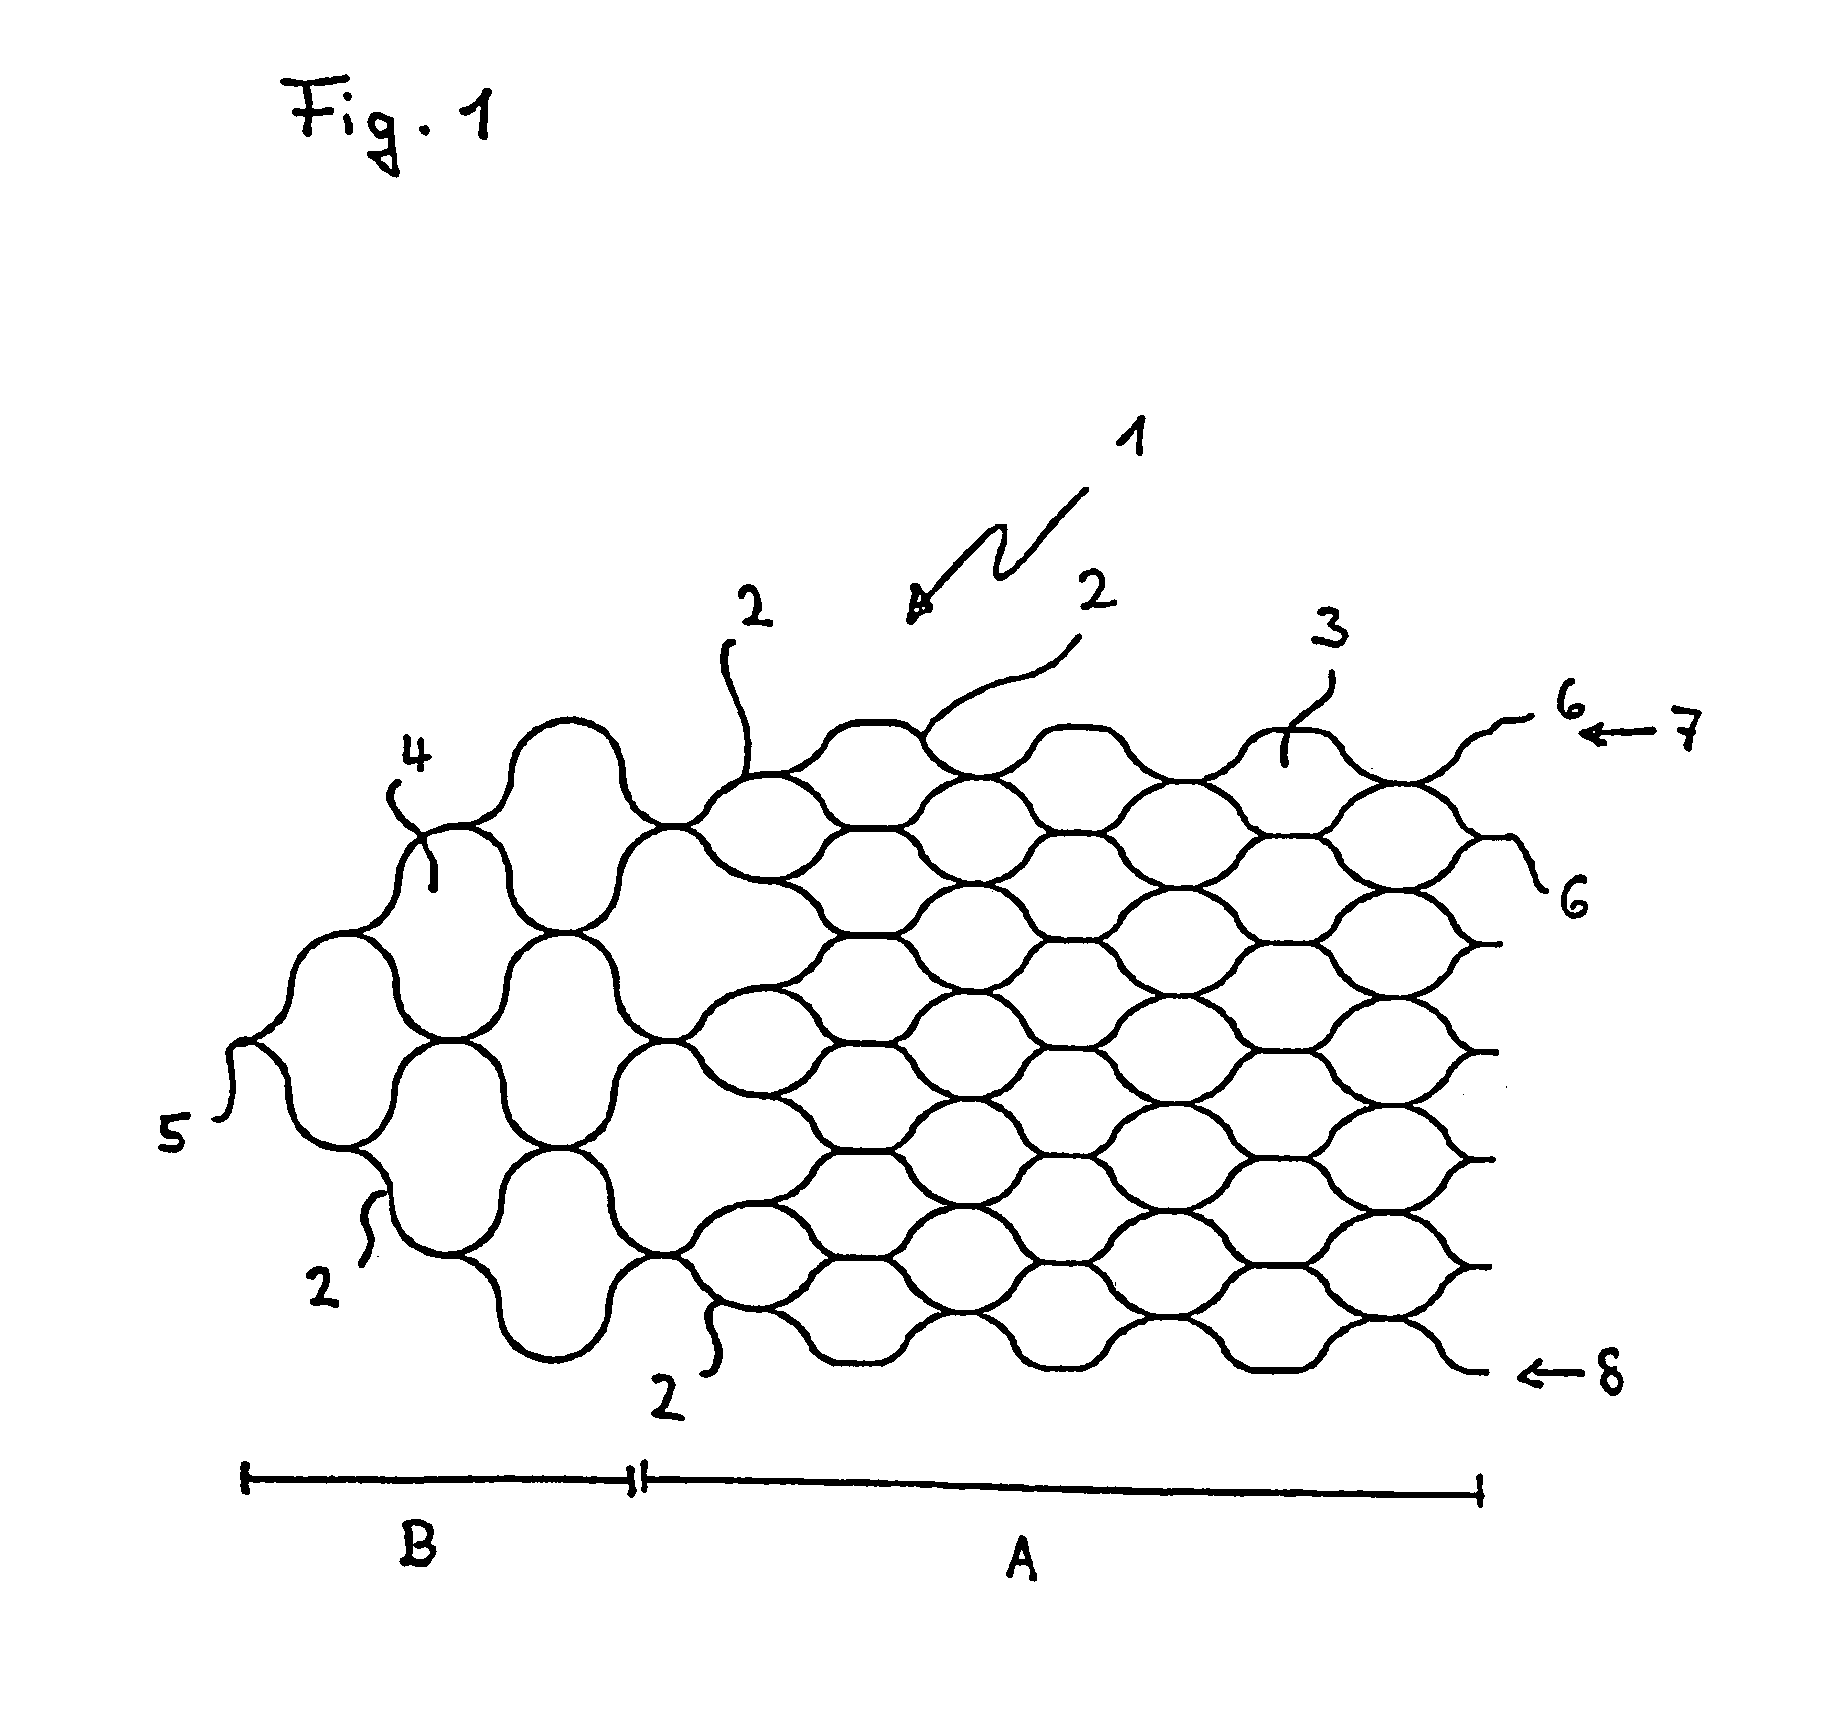 Medical implant having a curlable matrix structure